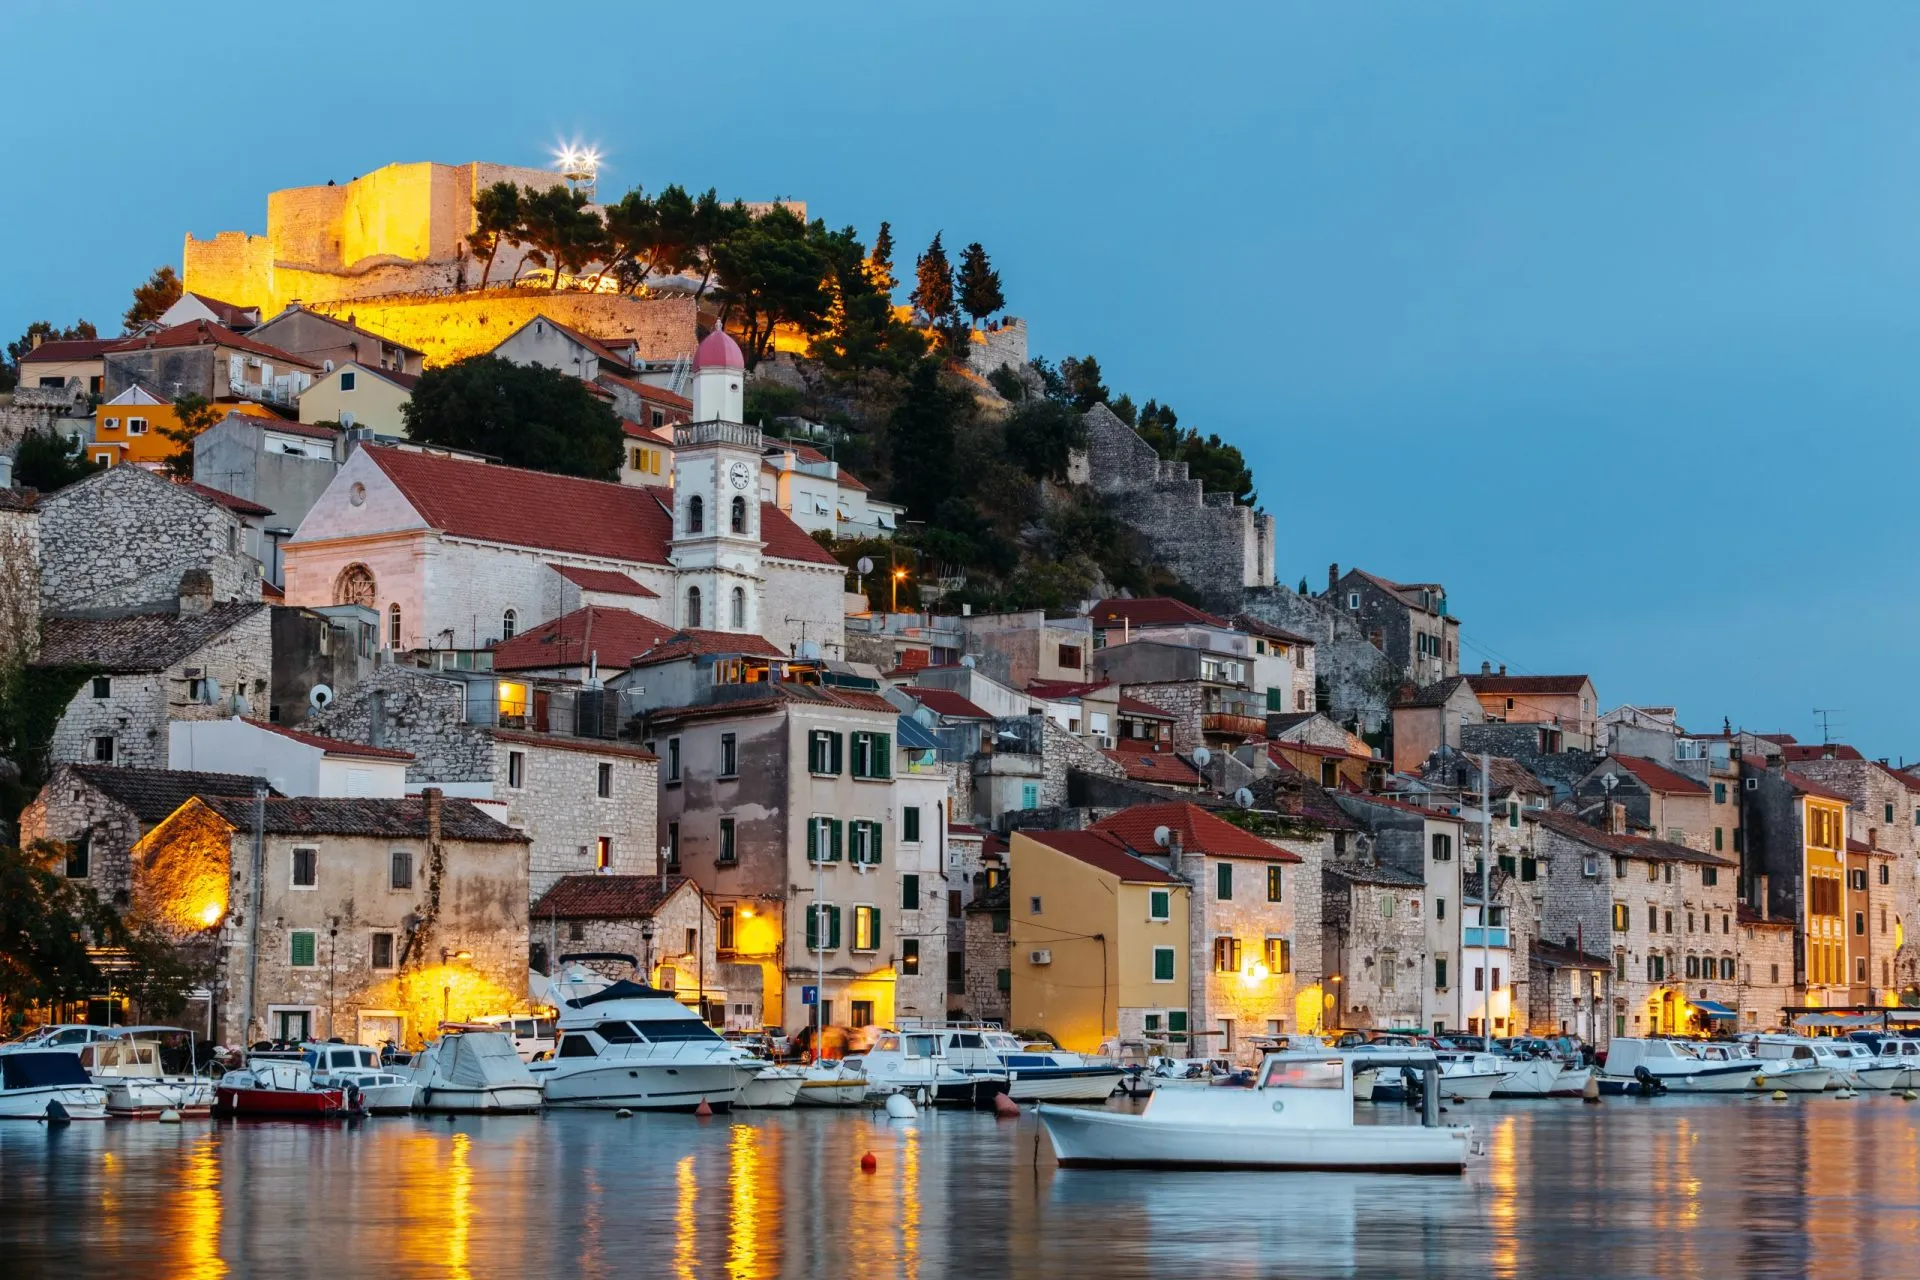 Evening view of the historical part with old houses and St. Michael's fortress in Sibenik, Croatia